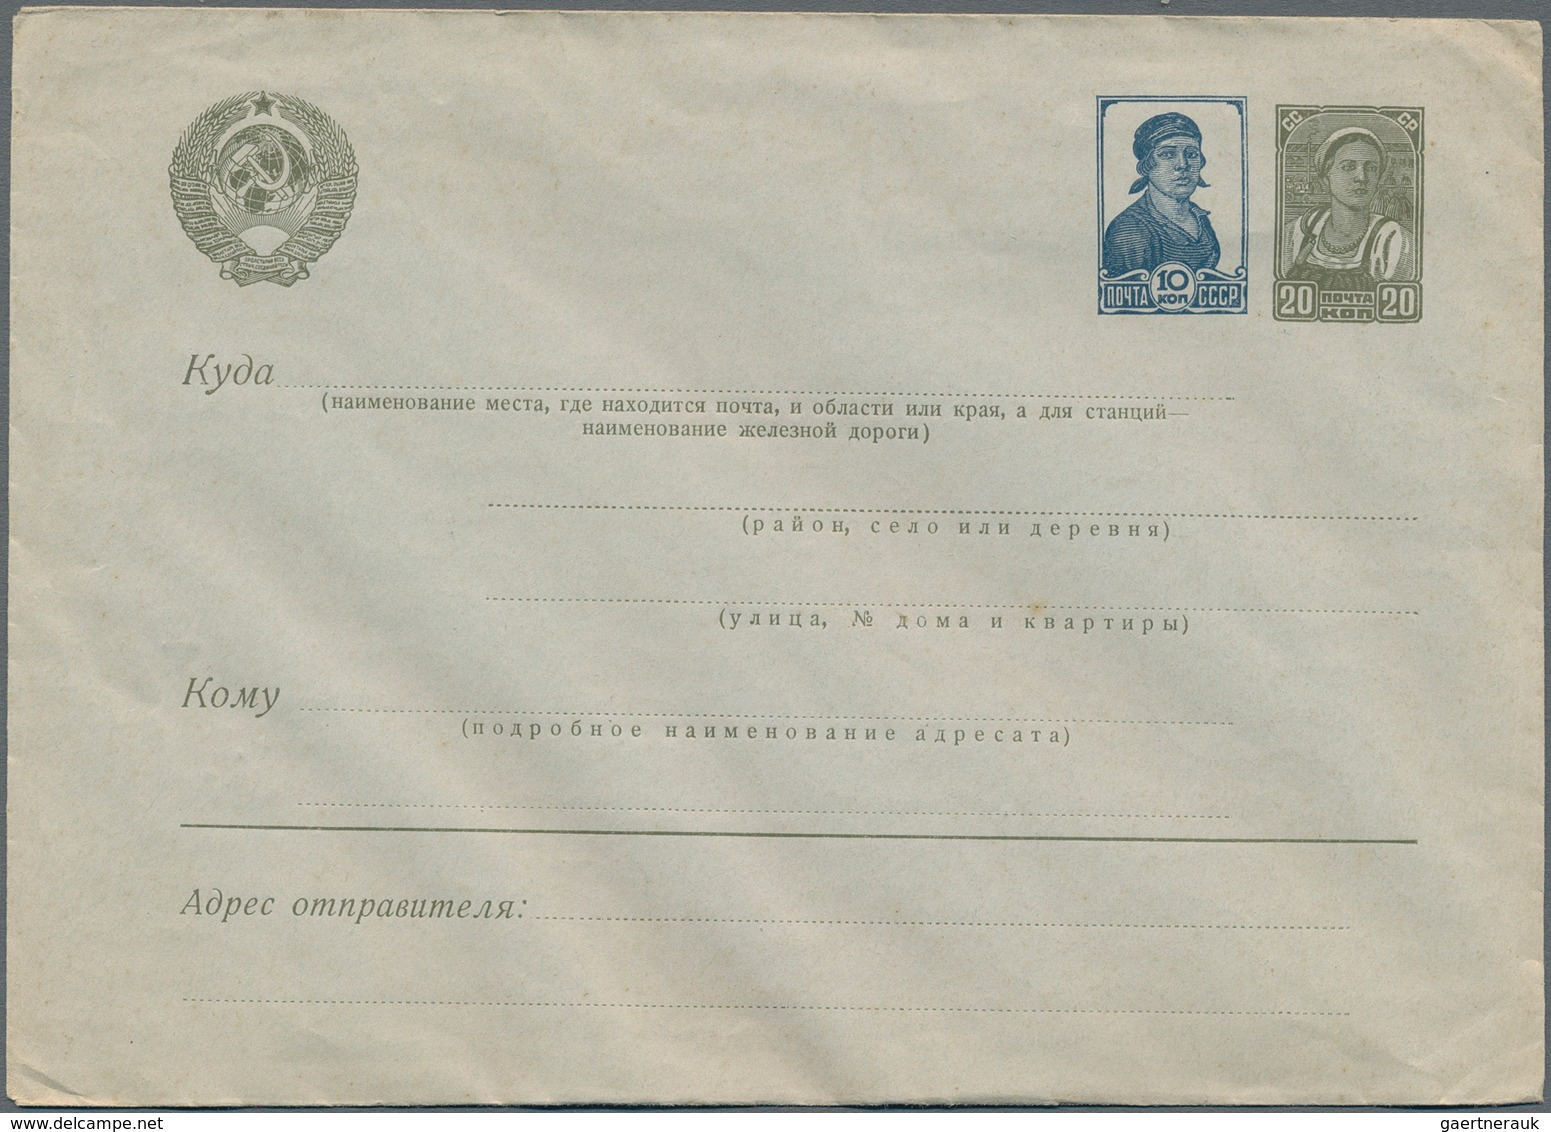 Sowjetunion - Ganzsachen: 1923/80 (ca.) holding of about 410 letters, cards, postal stationaries, re